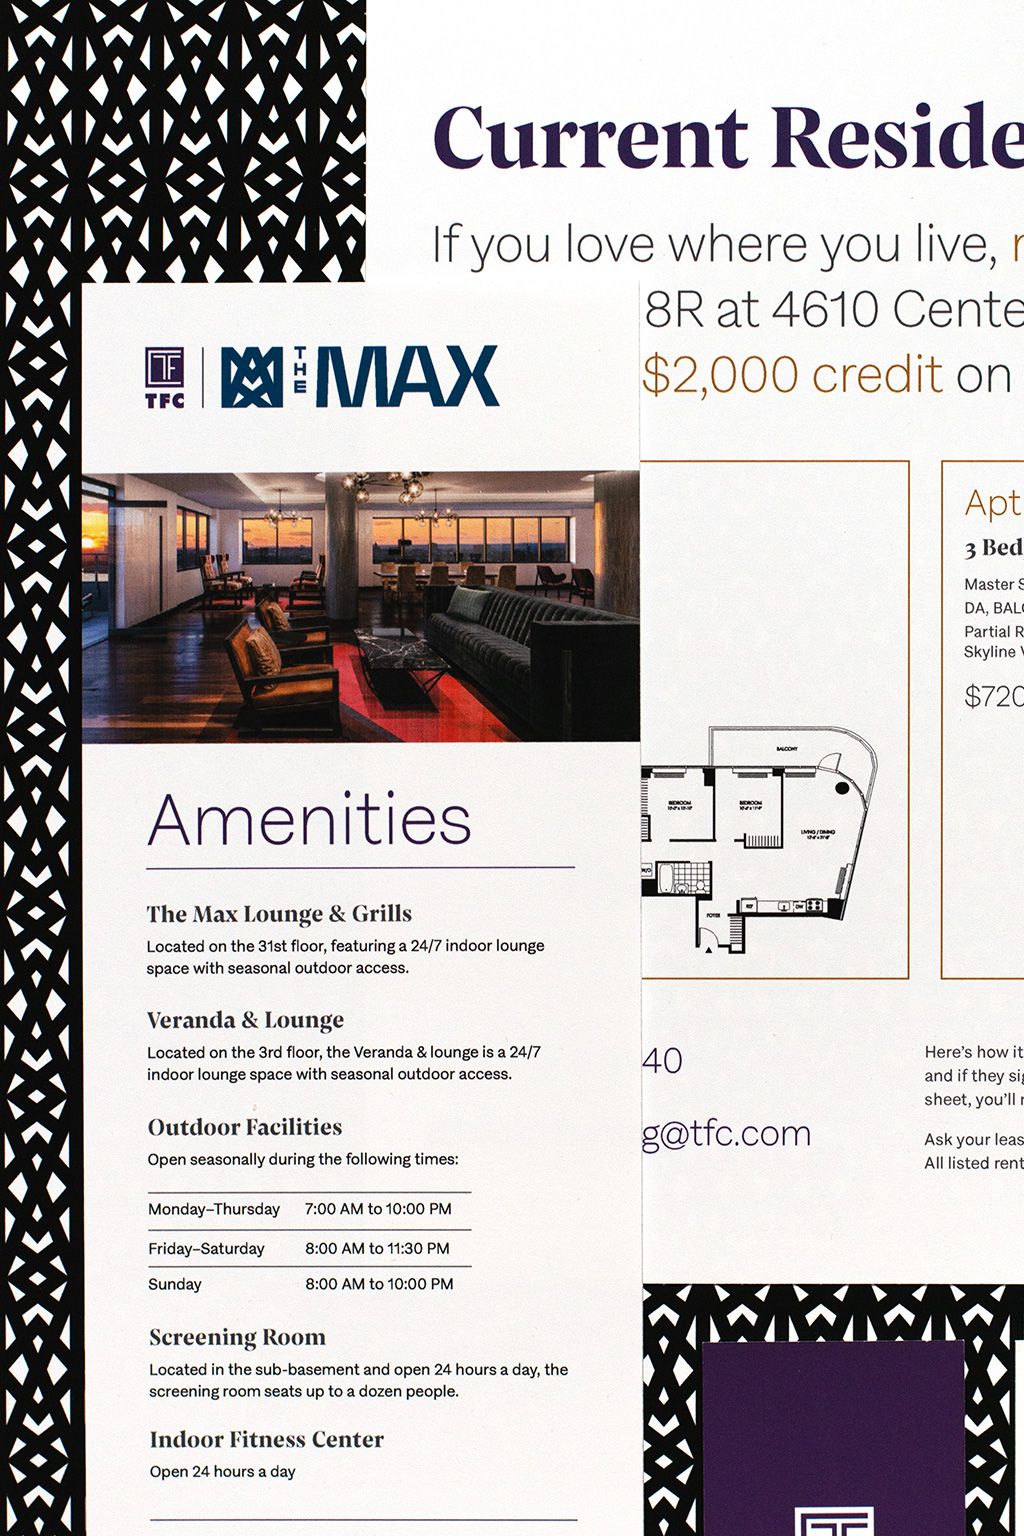 Photograph of printed materials for The Max